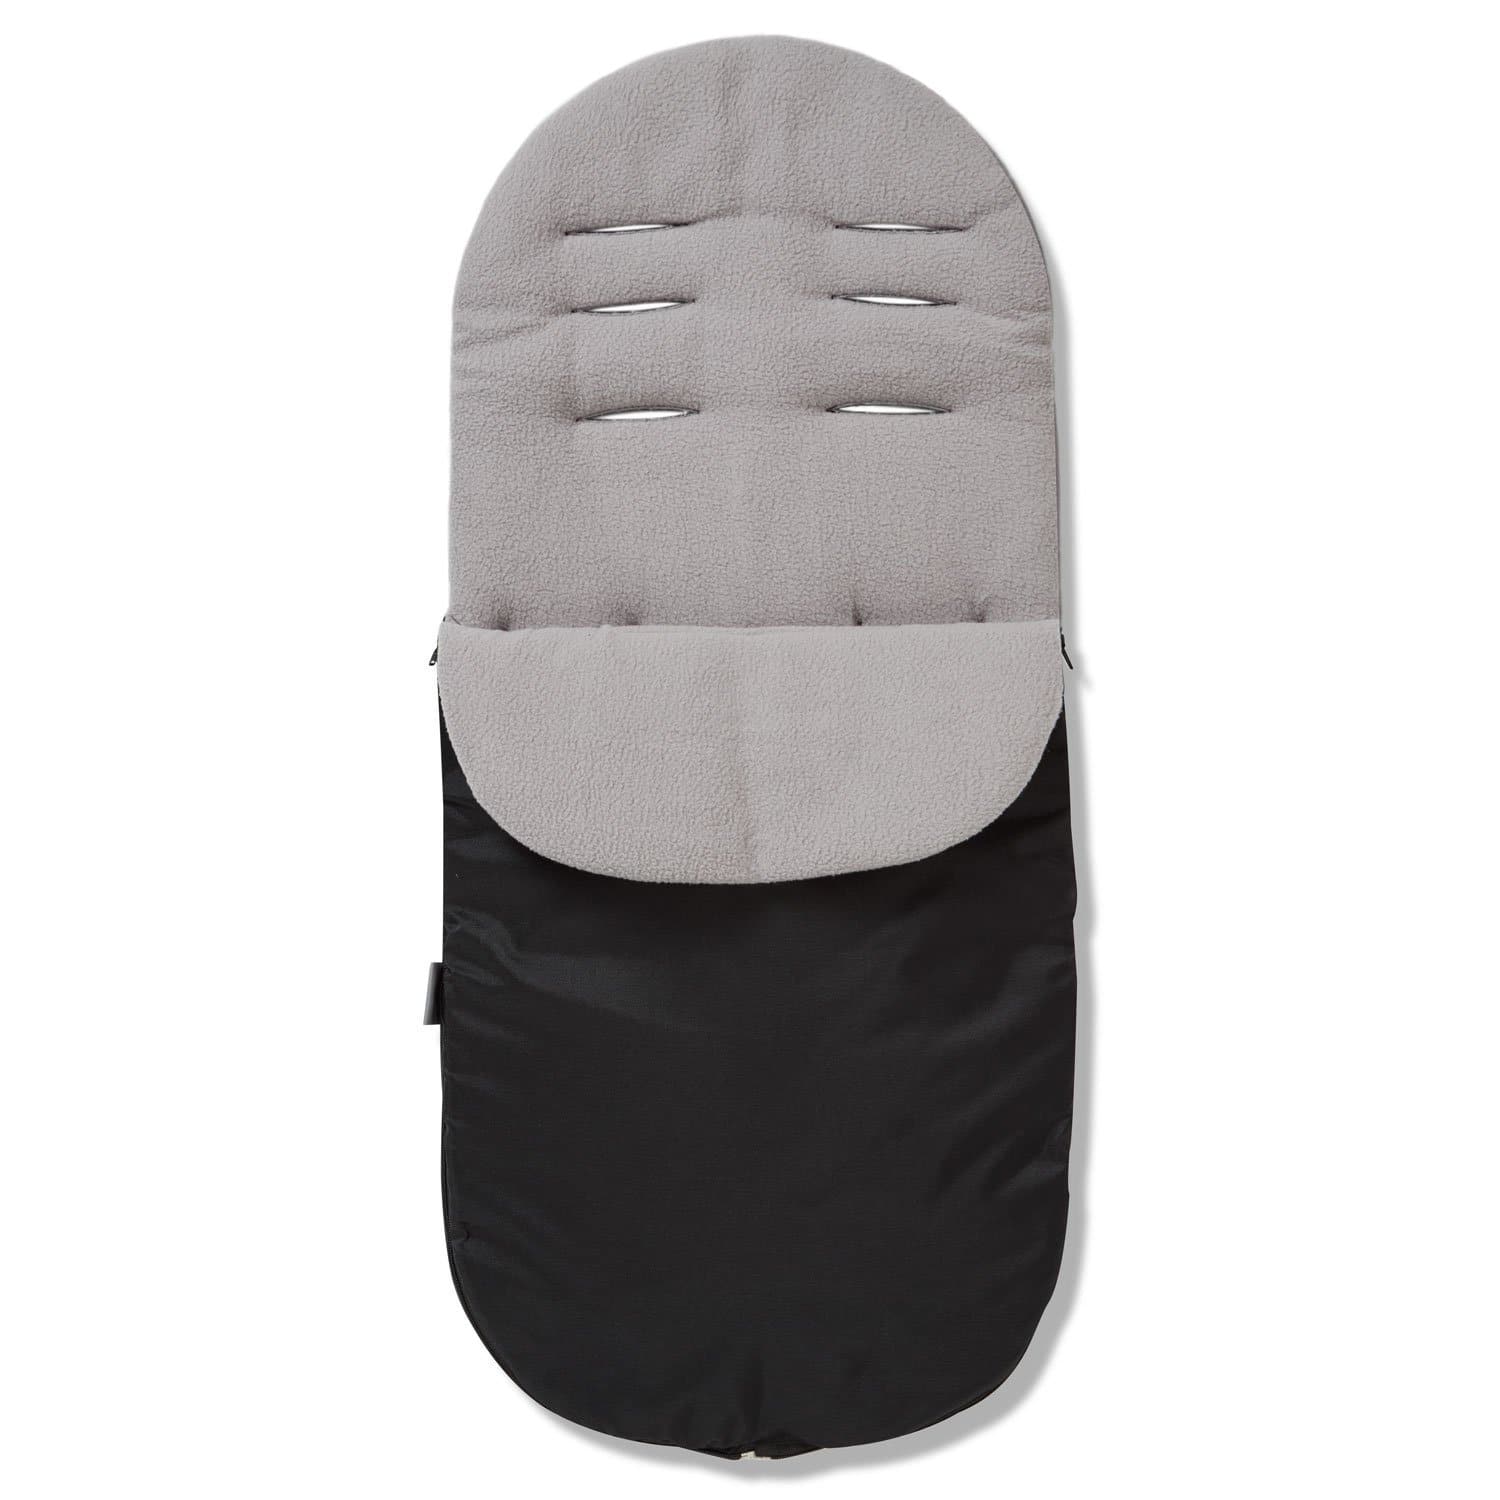 Footmuff / Cosy Toes Compatible with Jane - Grey / Fits All Models | For Your Little One